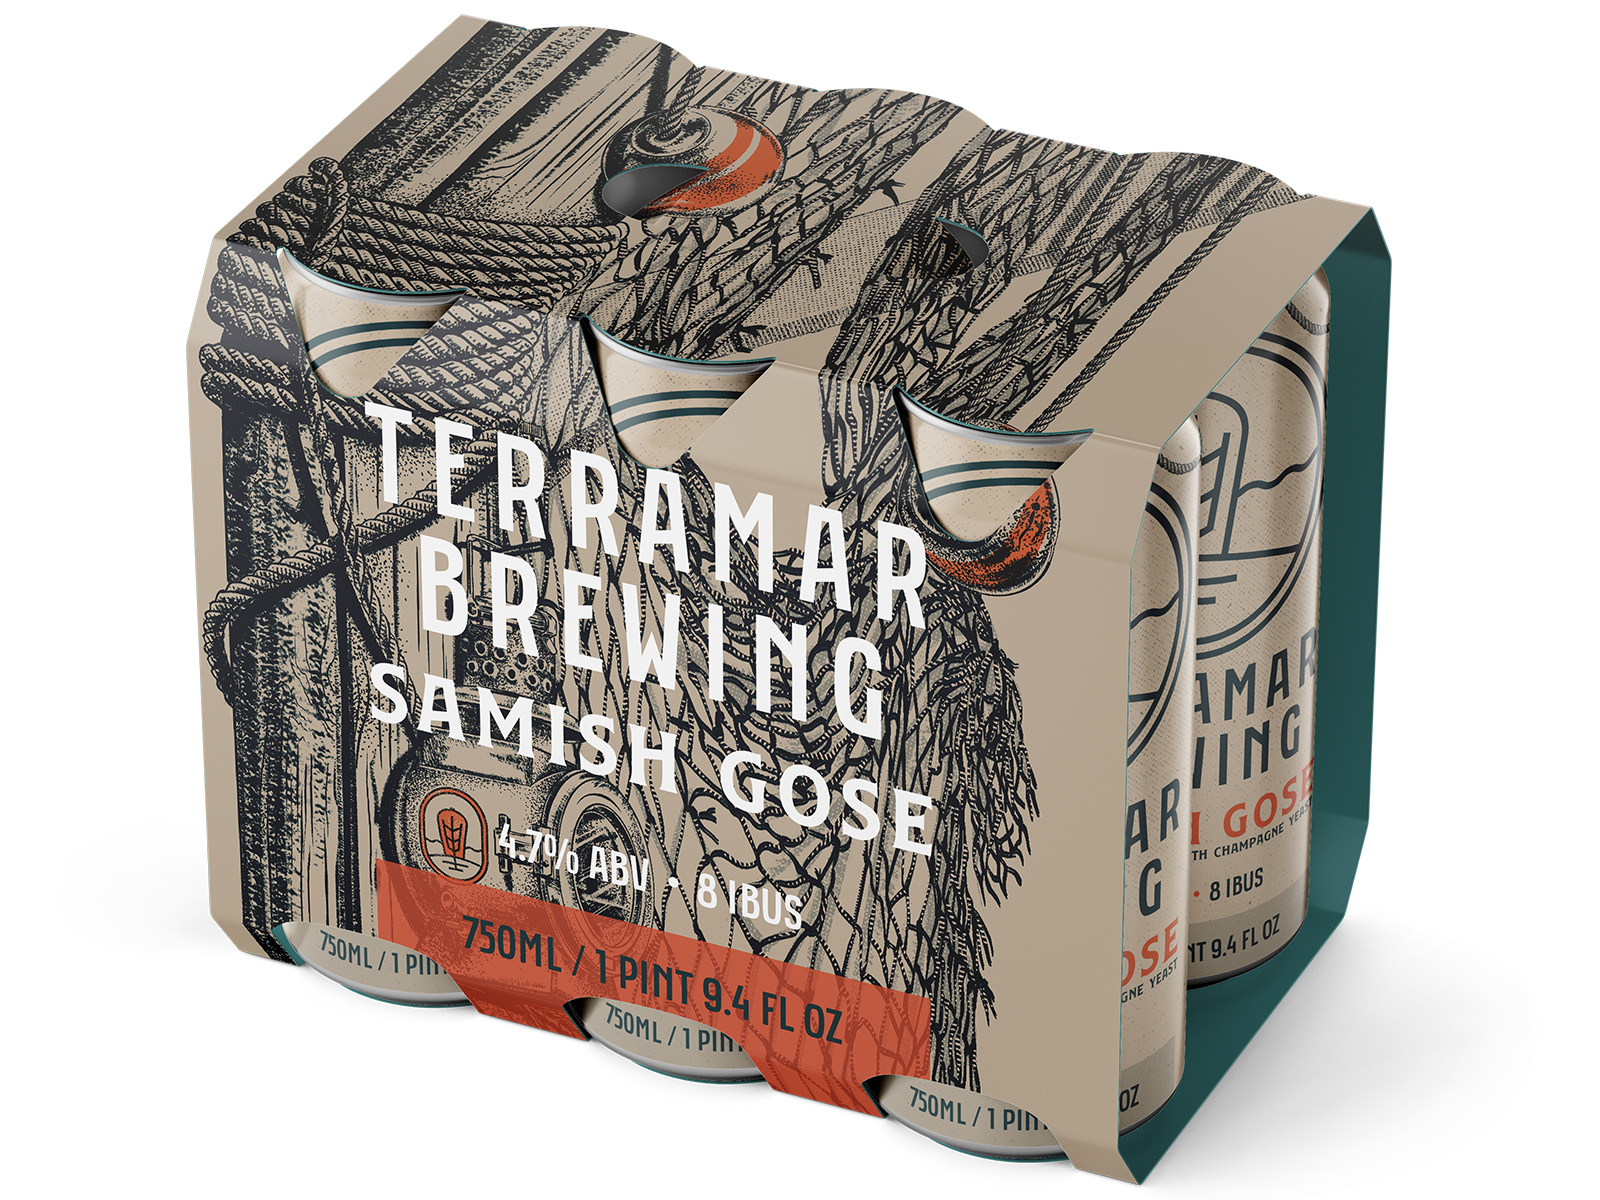 Samish 6 pack alcohol ale beer beverage bottle box brewery brewing can cans gose illustration label lantern nautical net packaging rope six pack